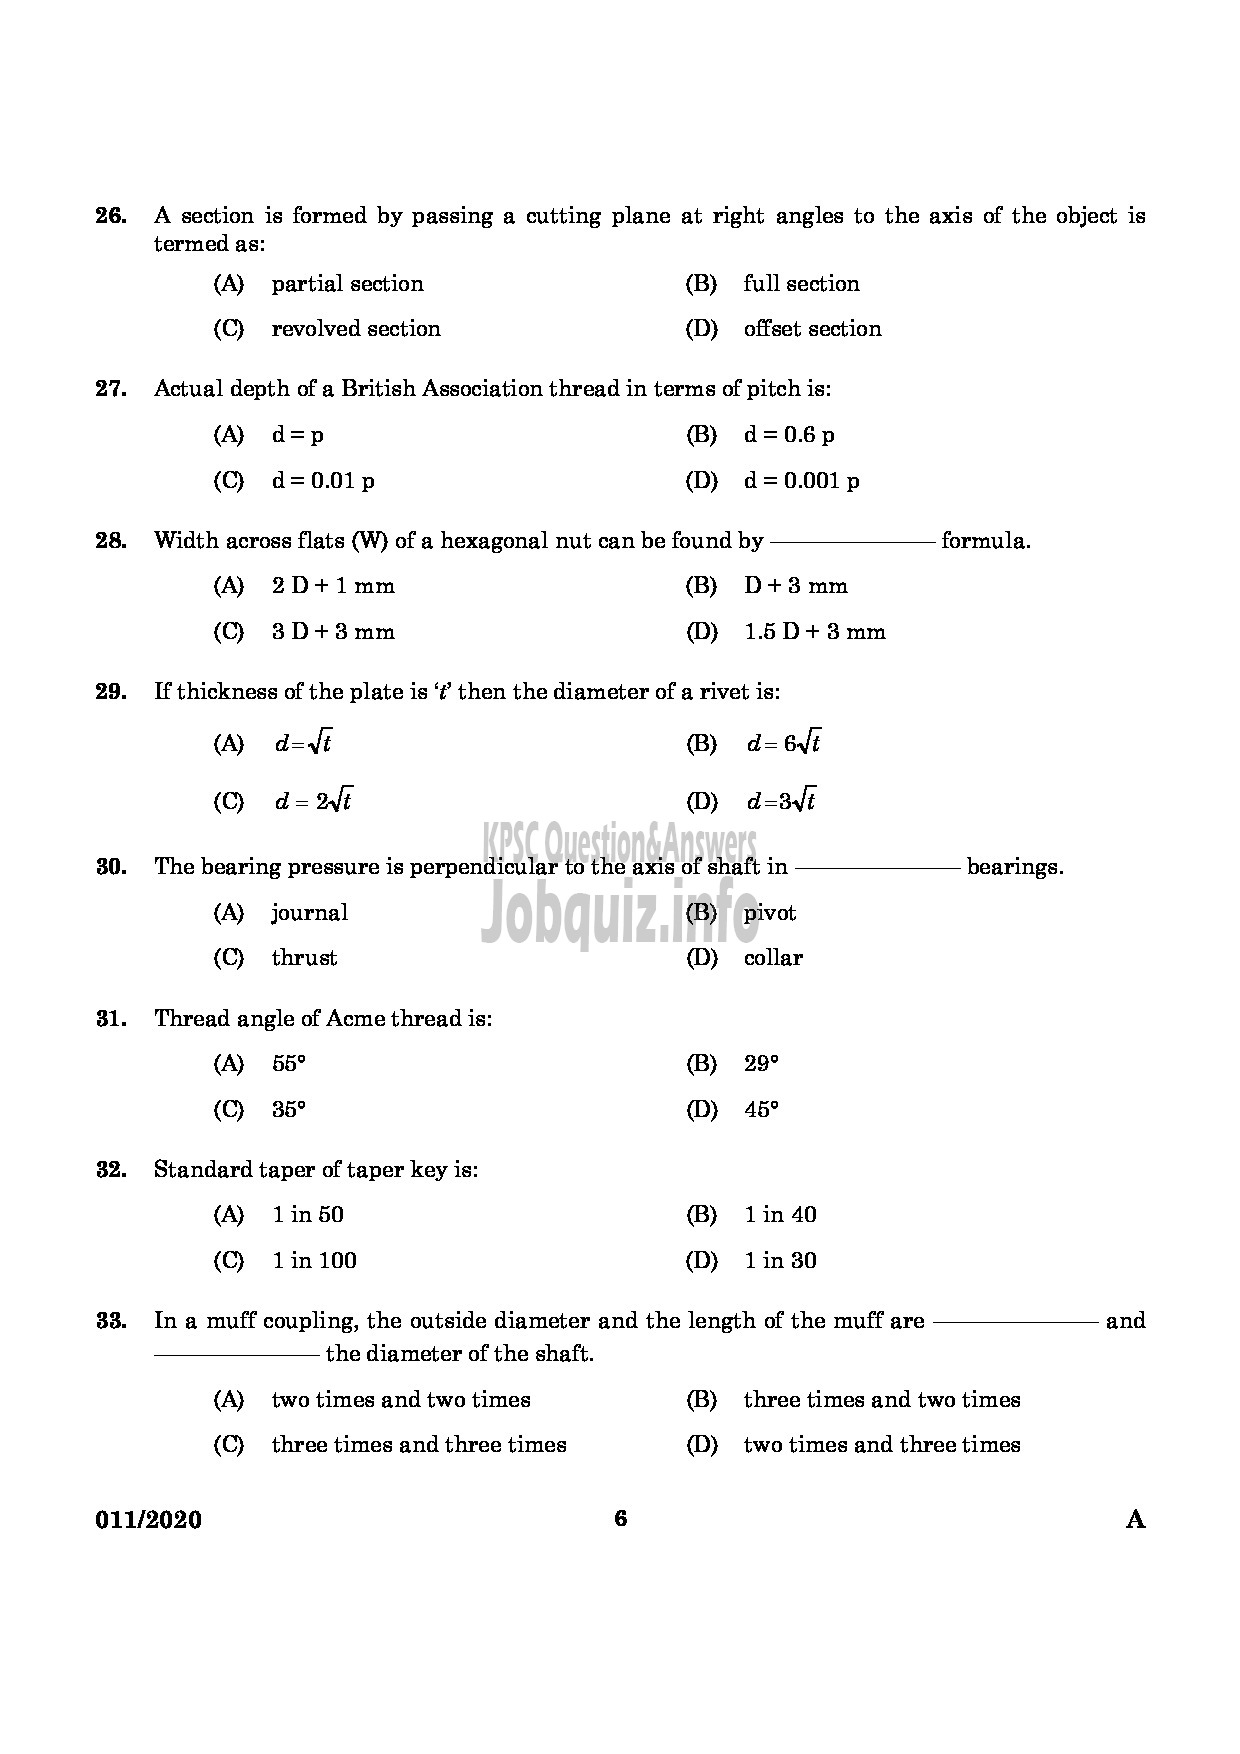 Kerala PSC Question Paper - Tracer Grade I Malabar Cements Limited-4